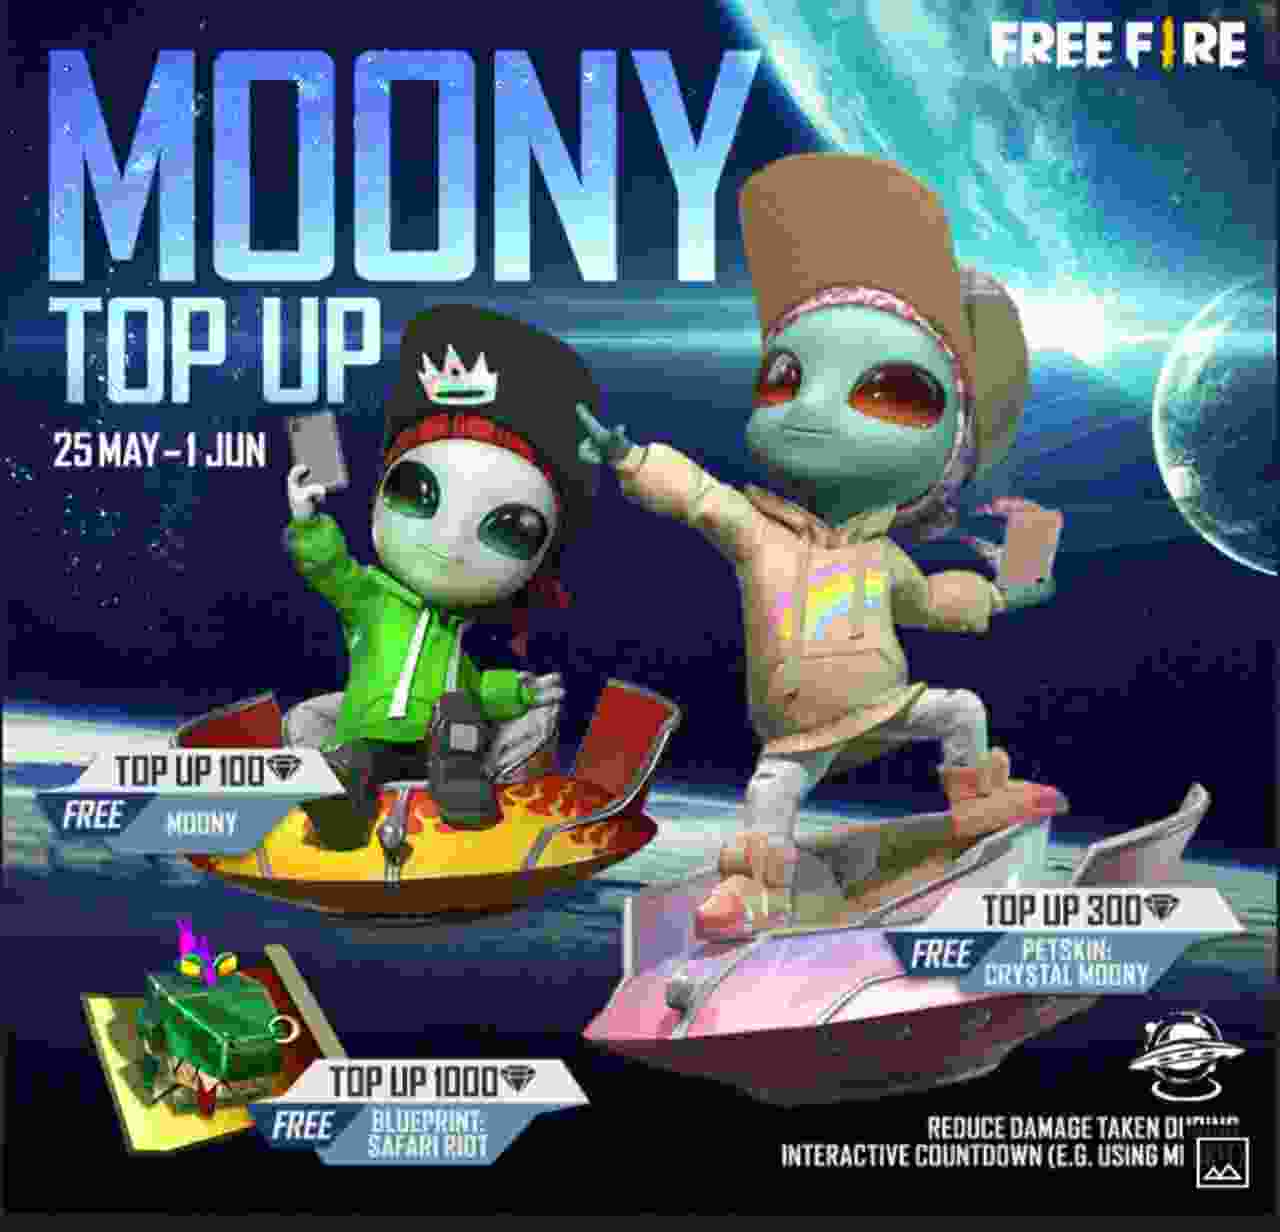 How To Get Moony Pet For Free In Free Fire Game? : Ability & Redeem Codes